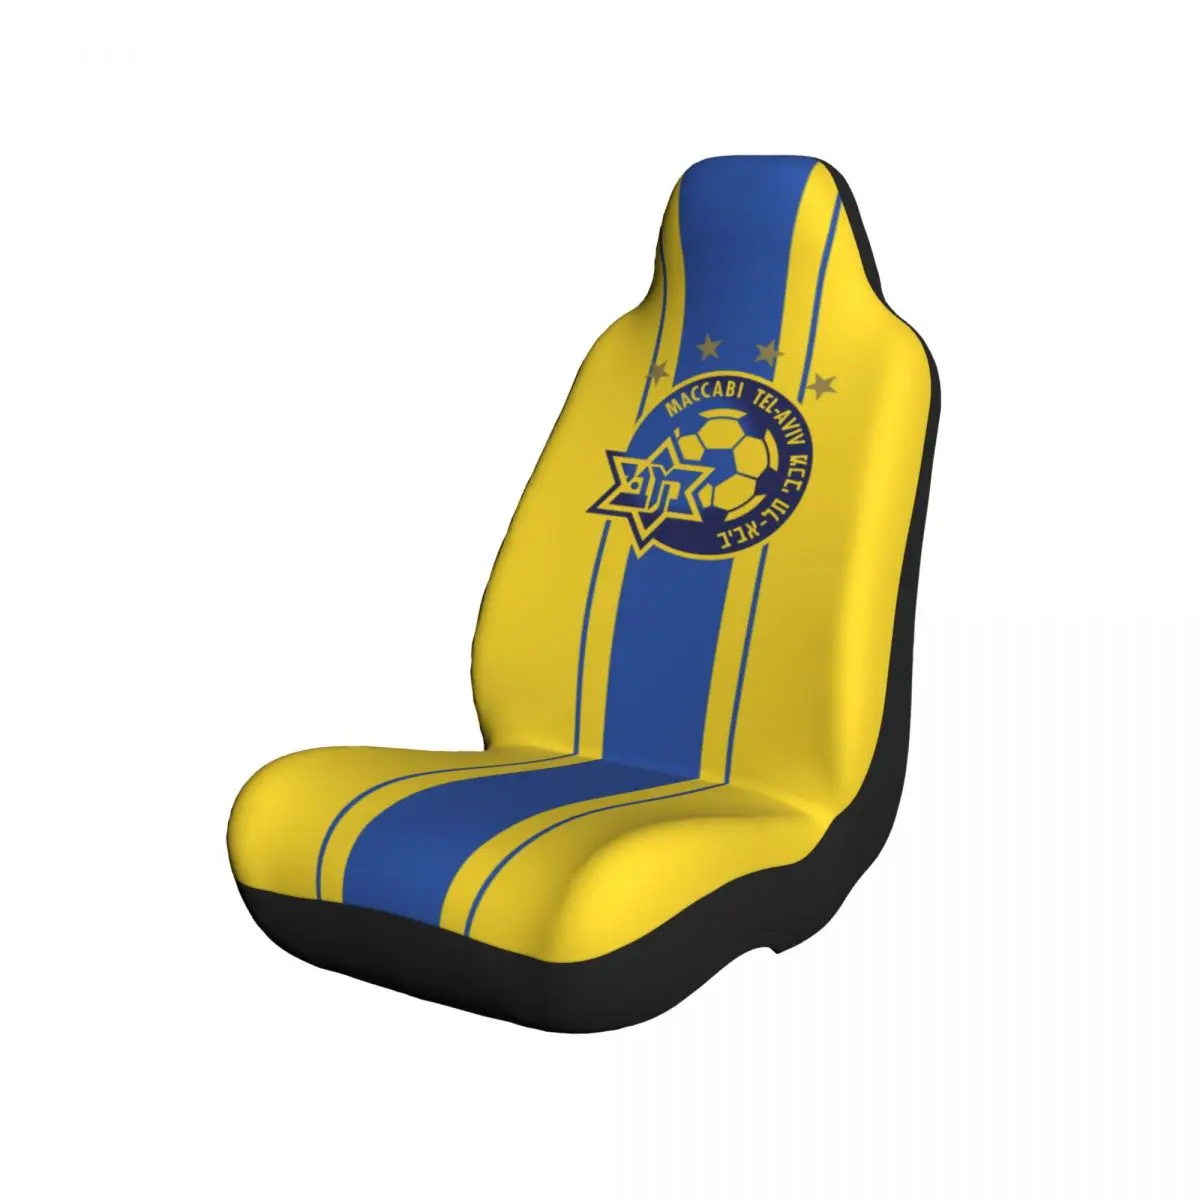 Israel Maccabi Tel Aviv Fc Car Seat Cover Elastic Design, Dustproof And Wear-Resistant to Protect Your Car car sun shade cover